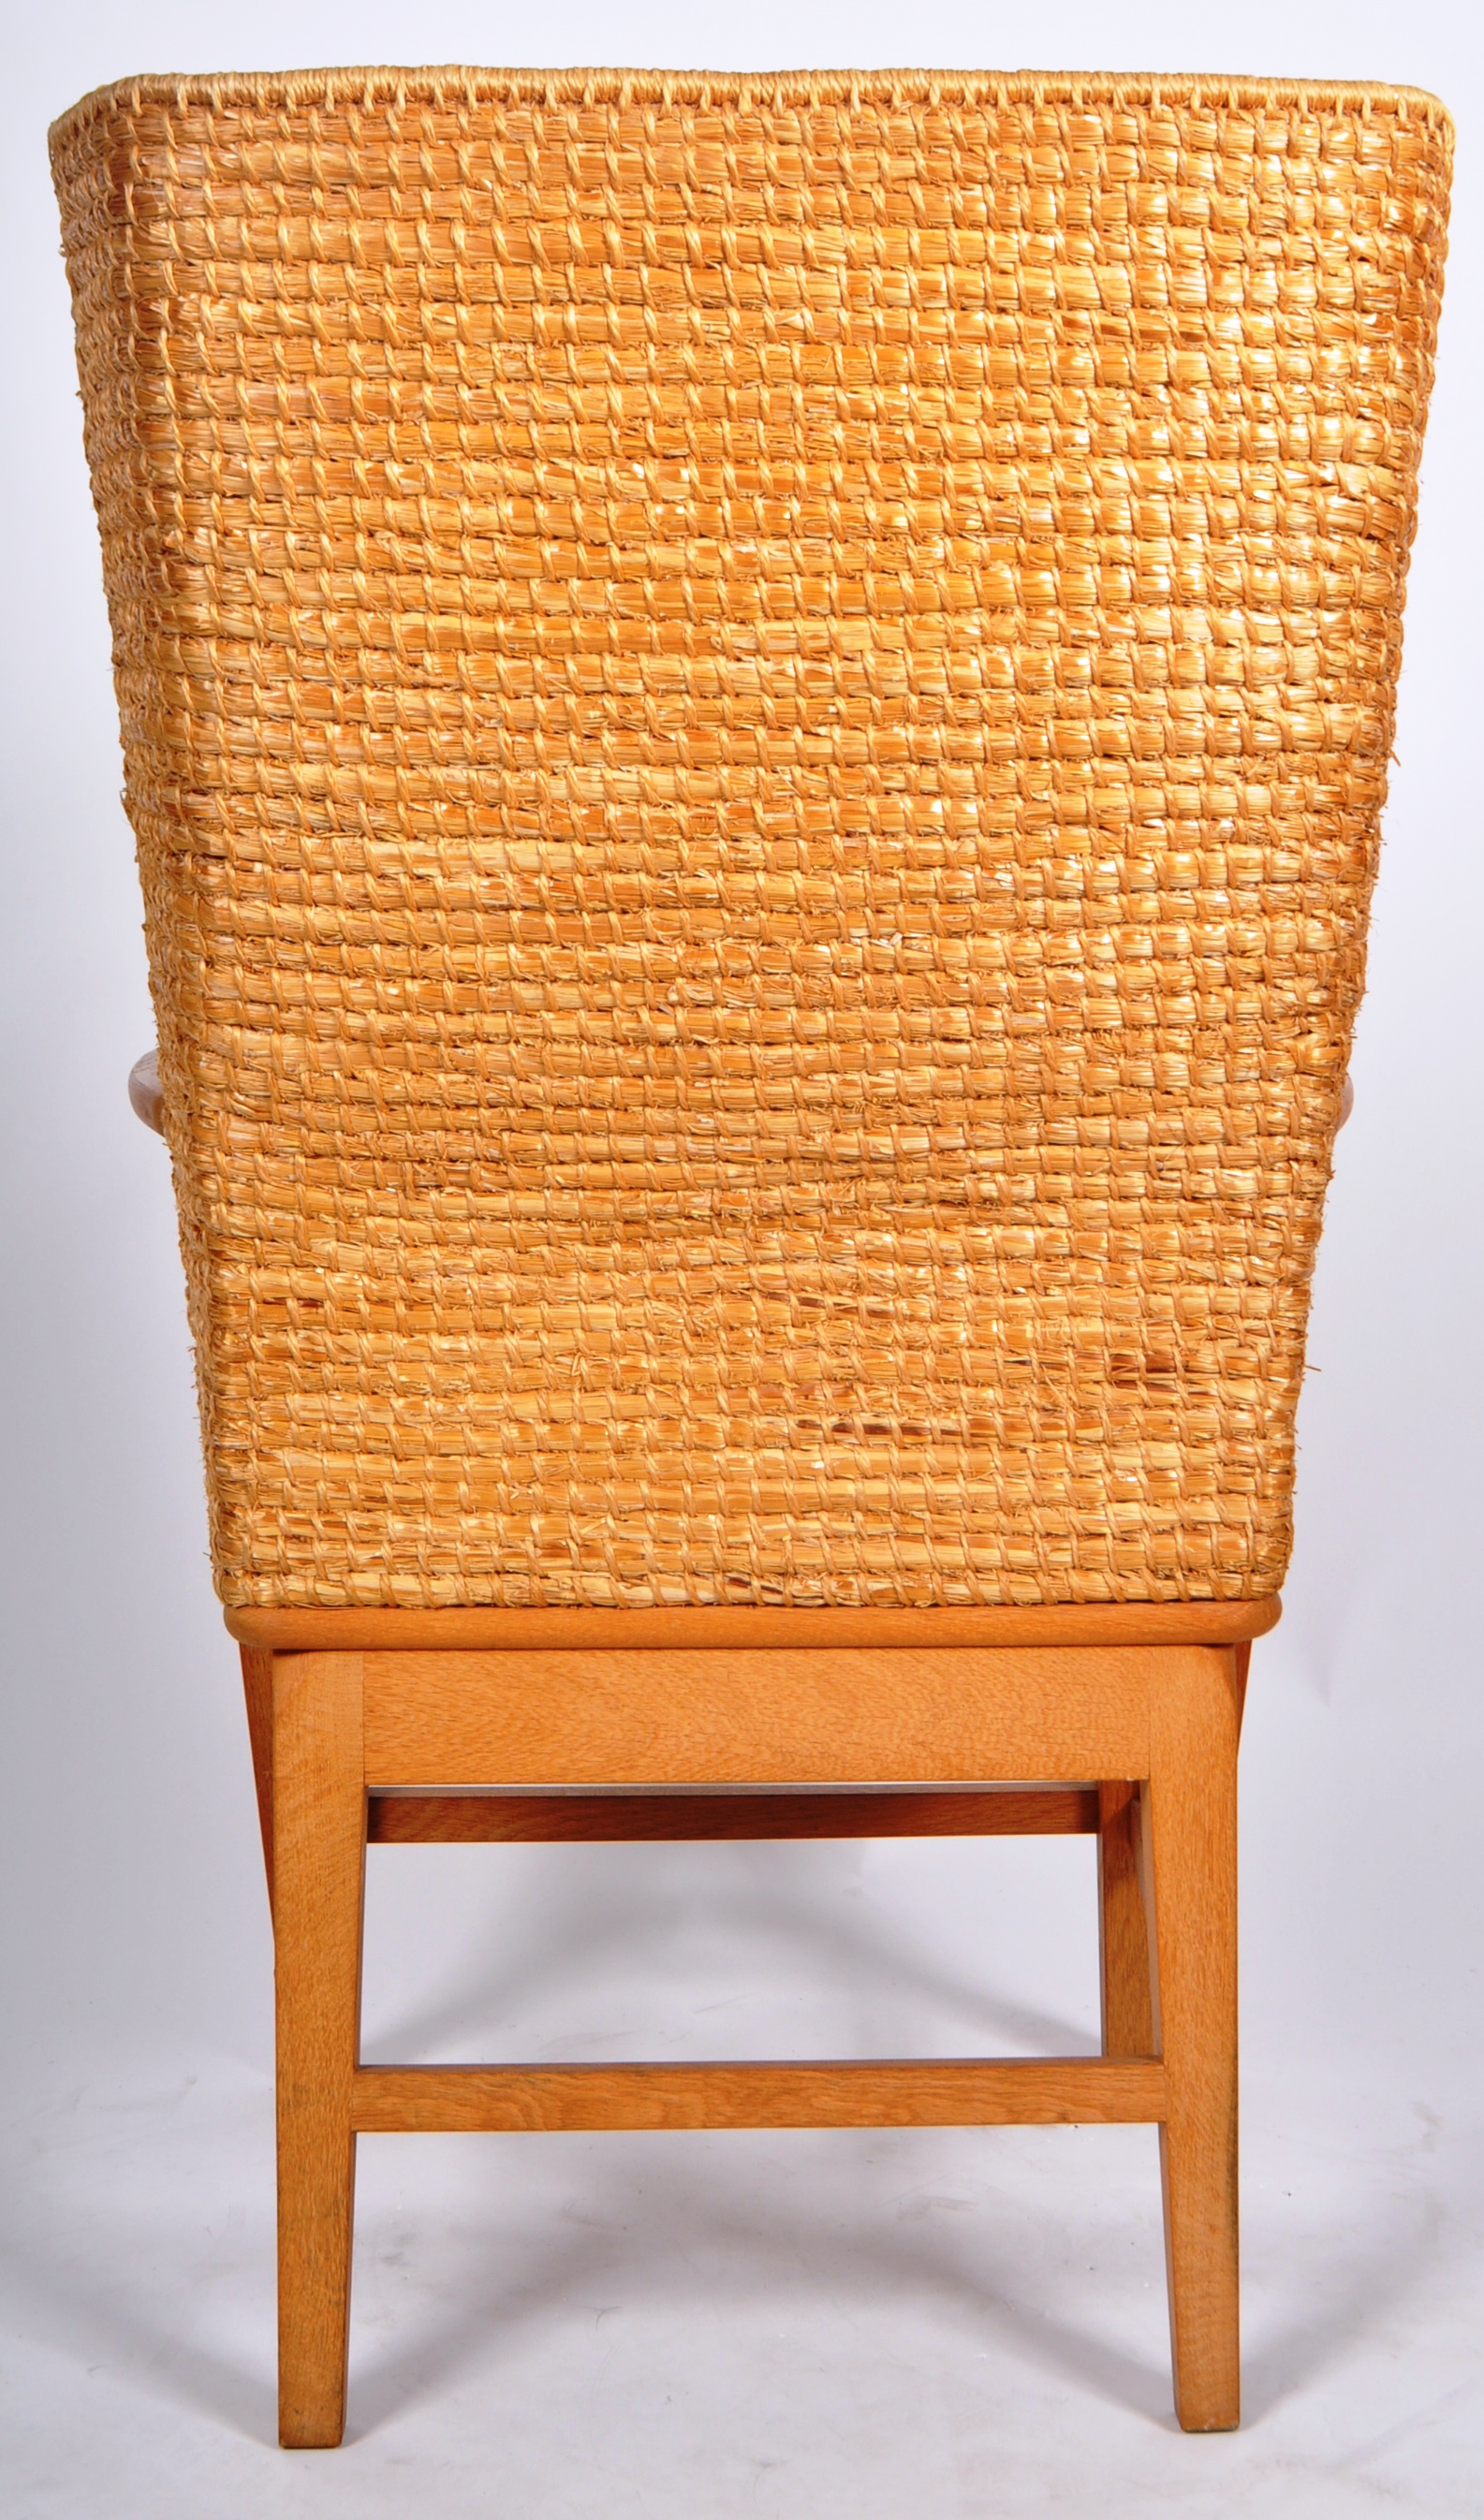 ORKNEY CHAIR - CONTEMPORARY DESIGNER OAK ARMCHAIR - Image 7 of 8